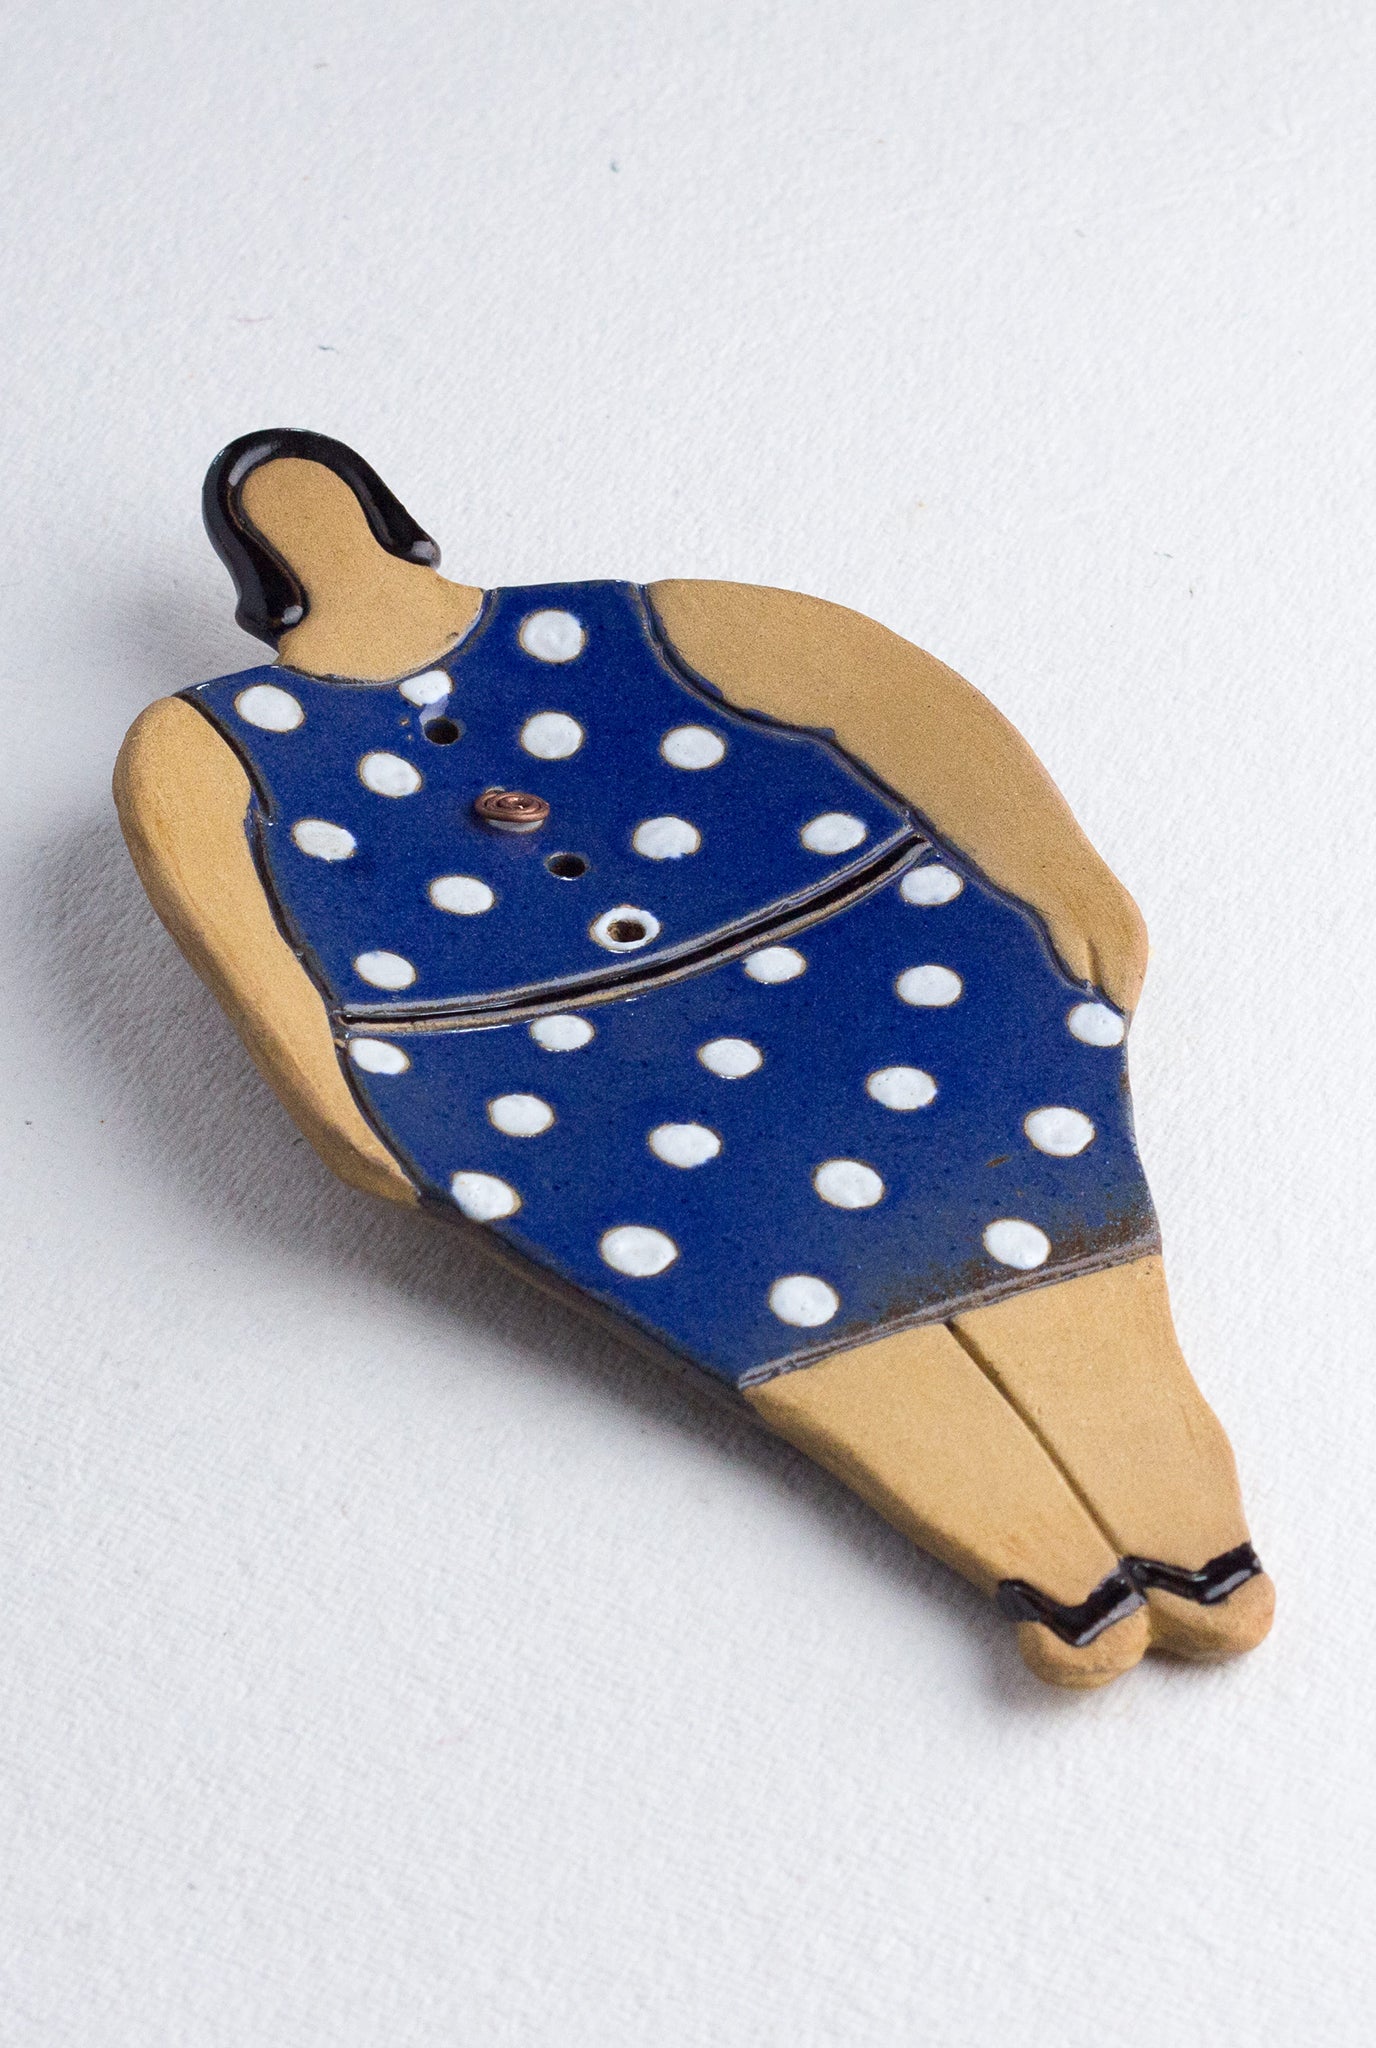 decor-handcrafted-ceramic-handpainted-wall decor-spoon rest